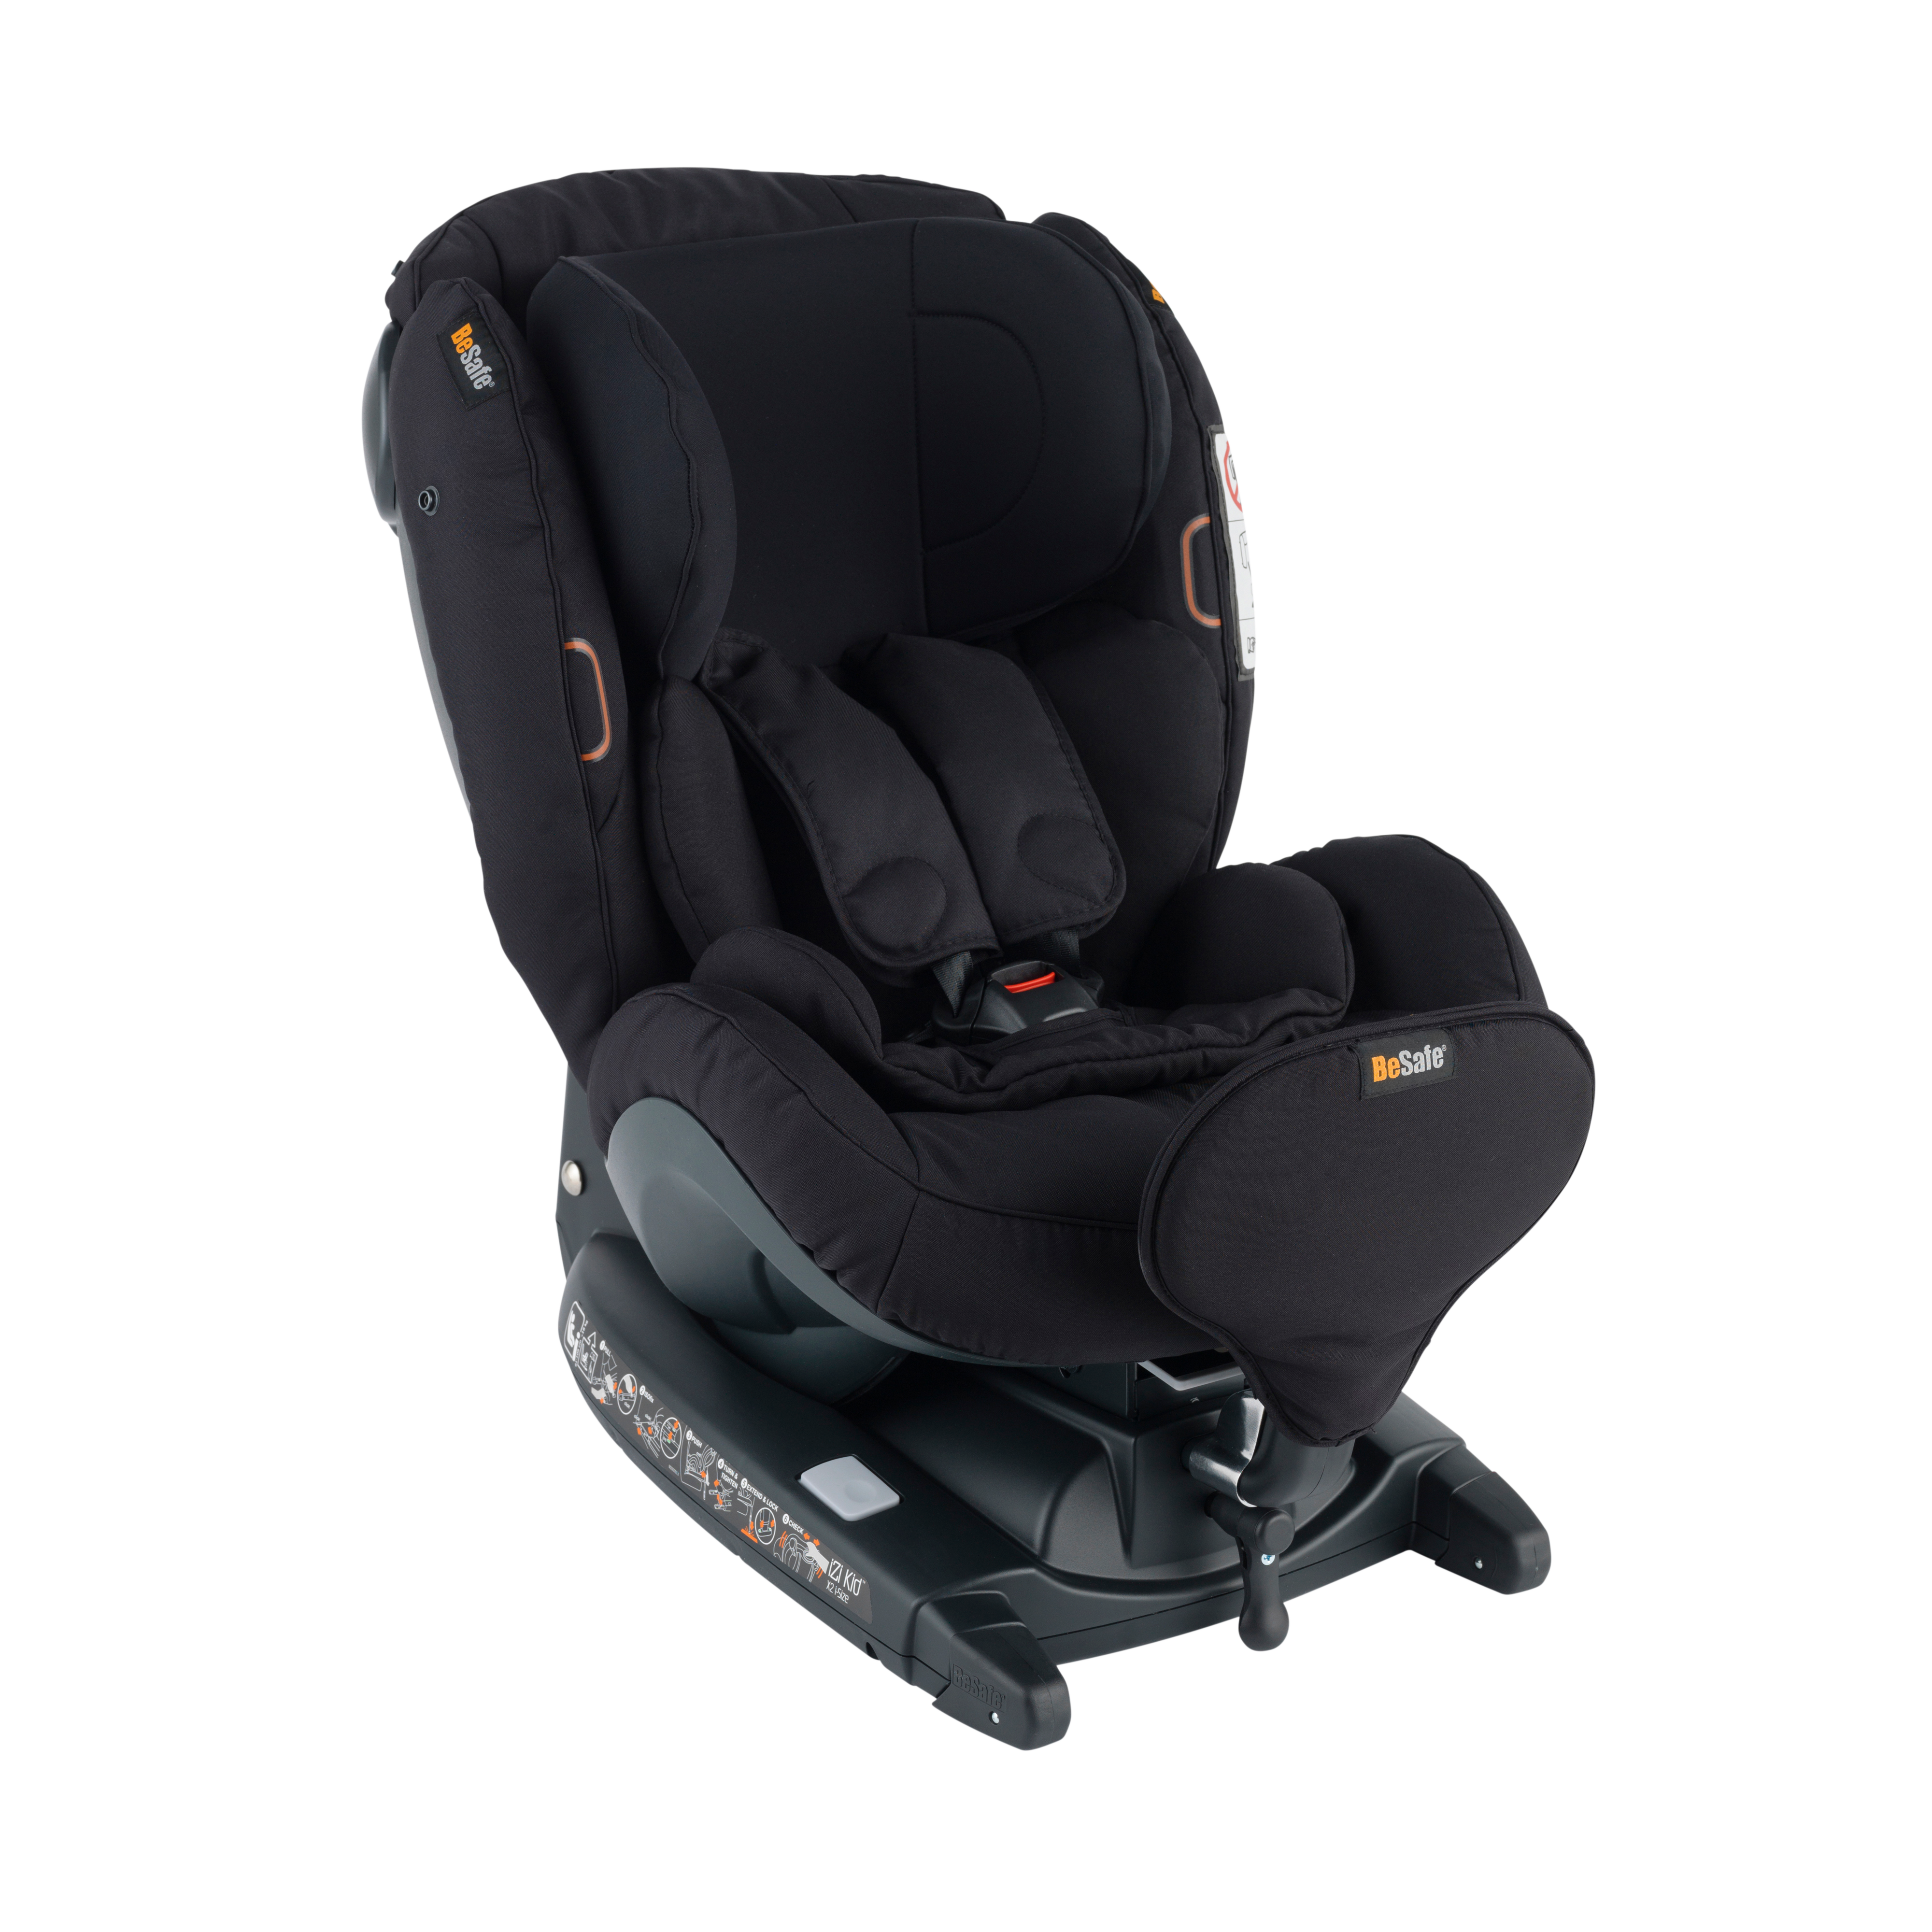 The purely rear facing child car seat, BeSafe iZi Kid X3 i-Size has passed  some of the toughest tests on the market: UN r129 (i-Size) and Swedish Plus